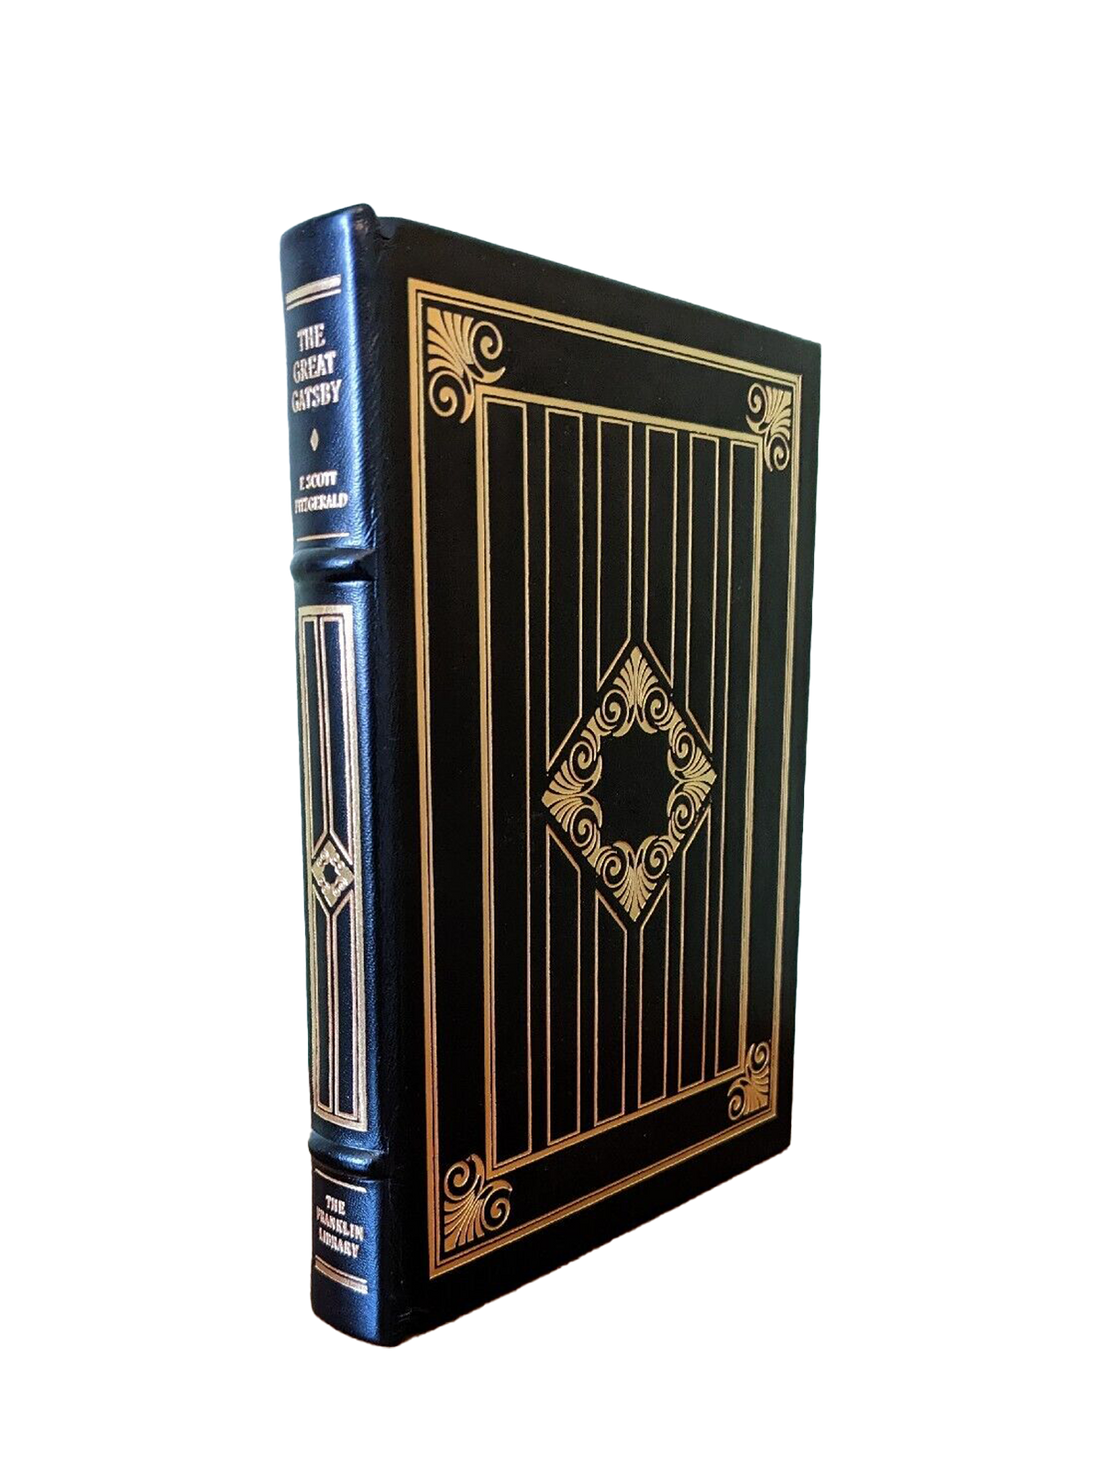 Black leather-bound edition of 'The Great Gatsby' by F. Scott Fitzgerald, featuring gold leaf detailing and a ribbon bookmark sold at Kadri Books